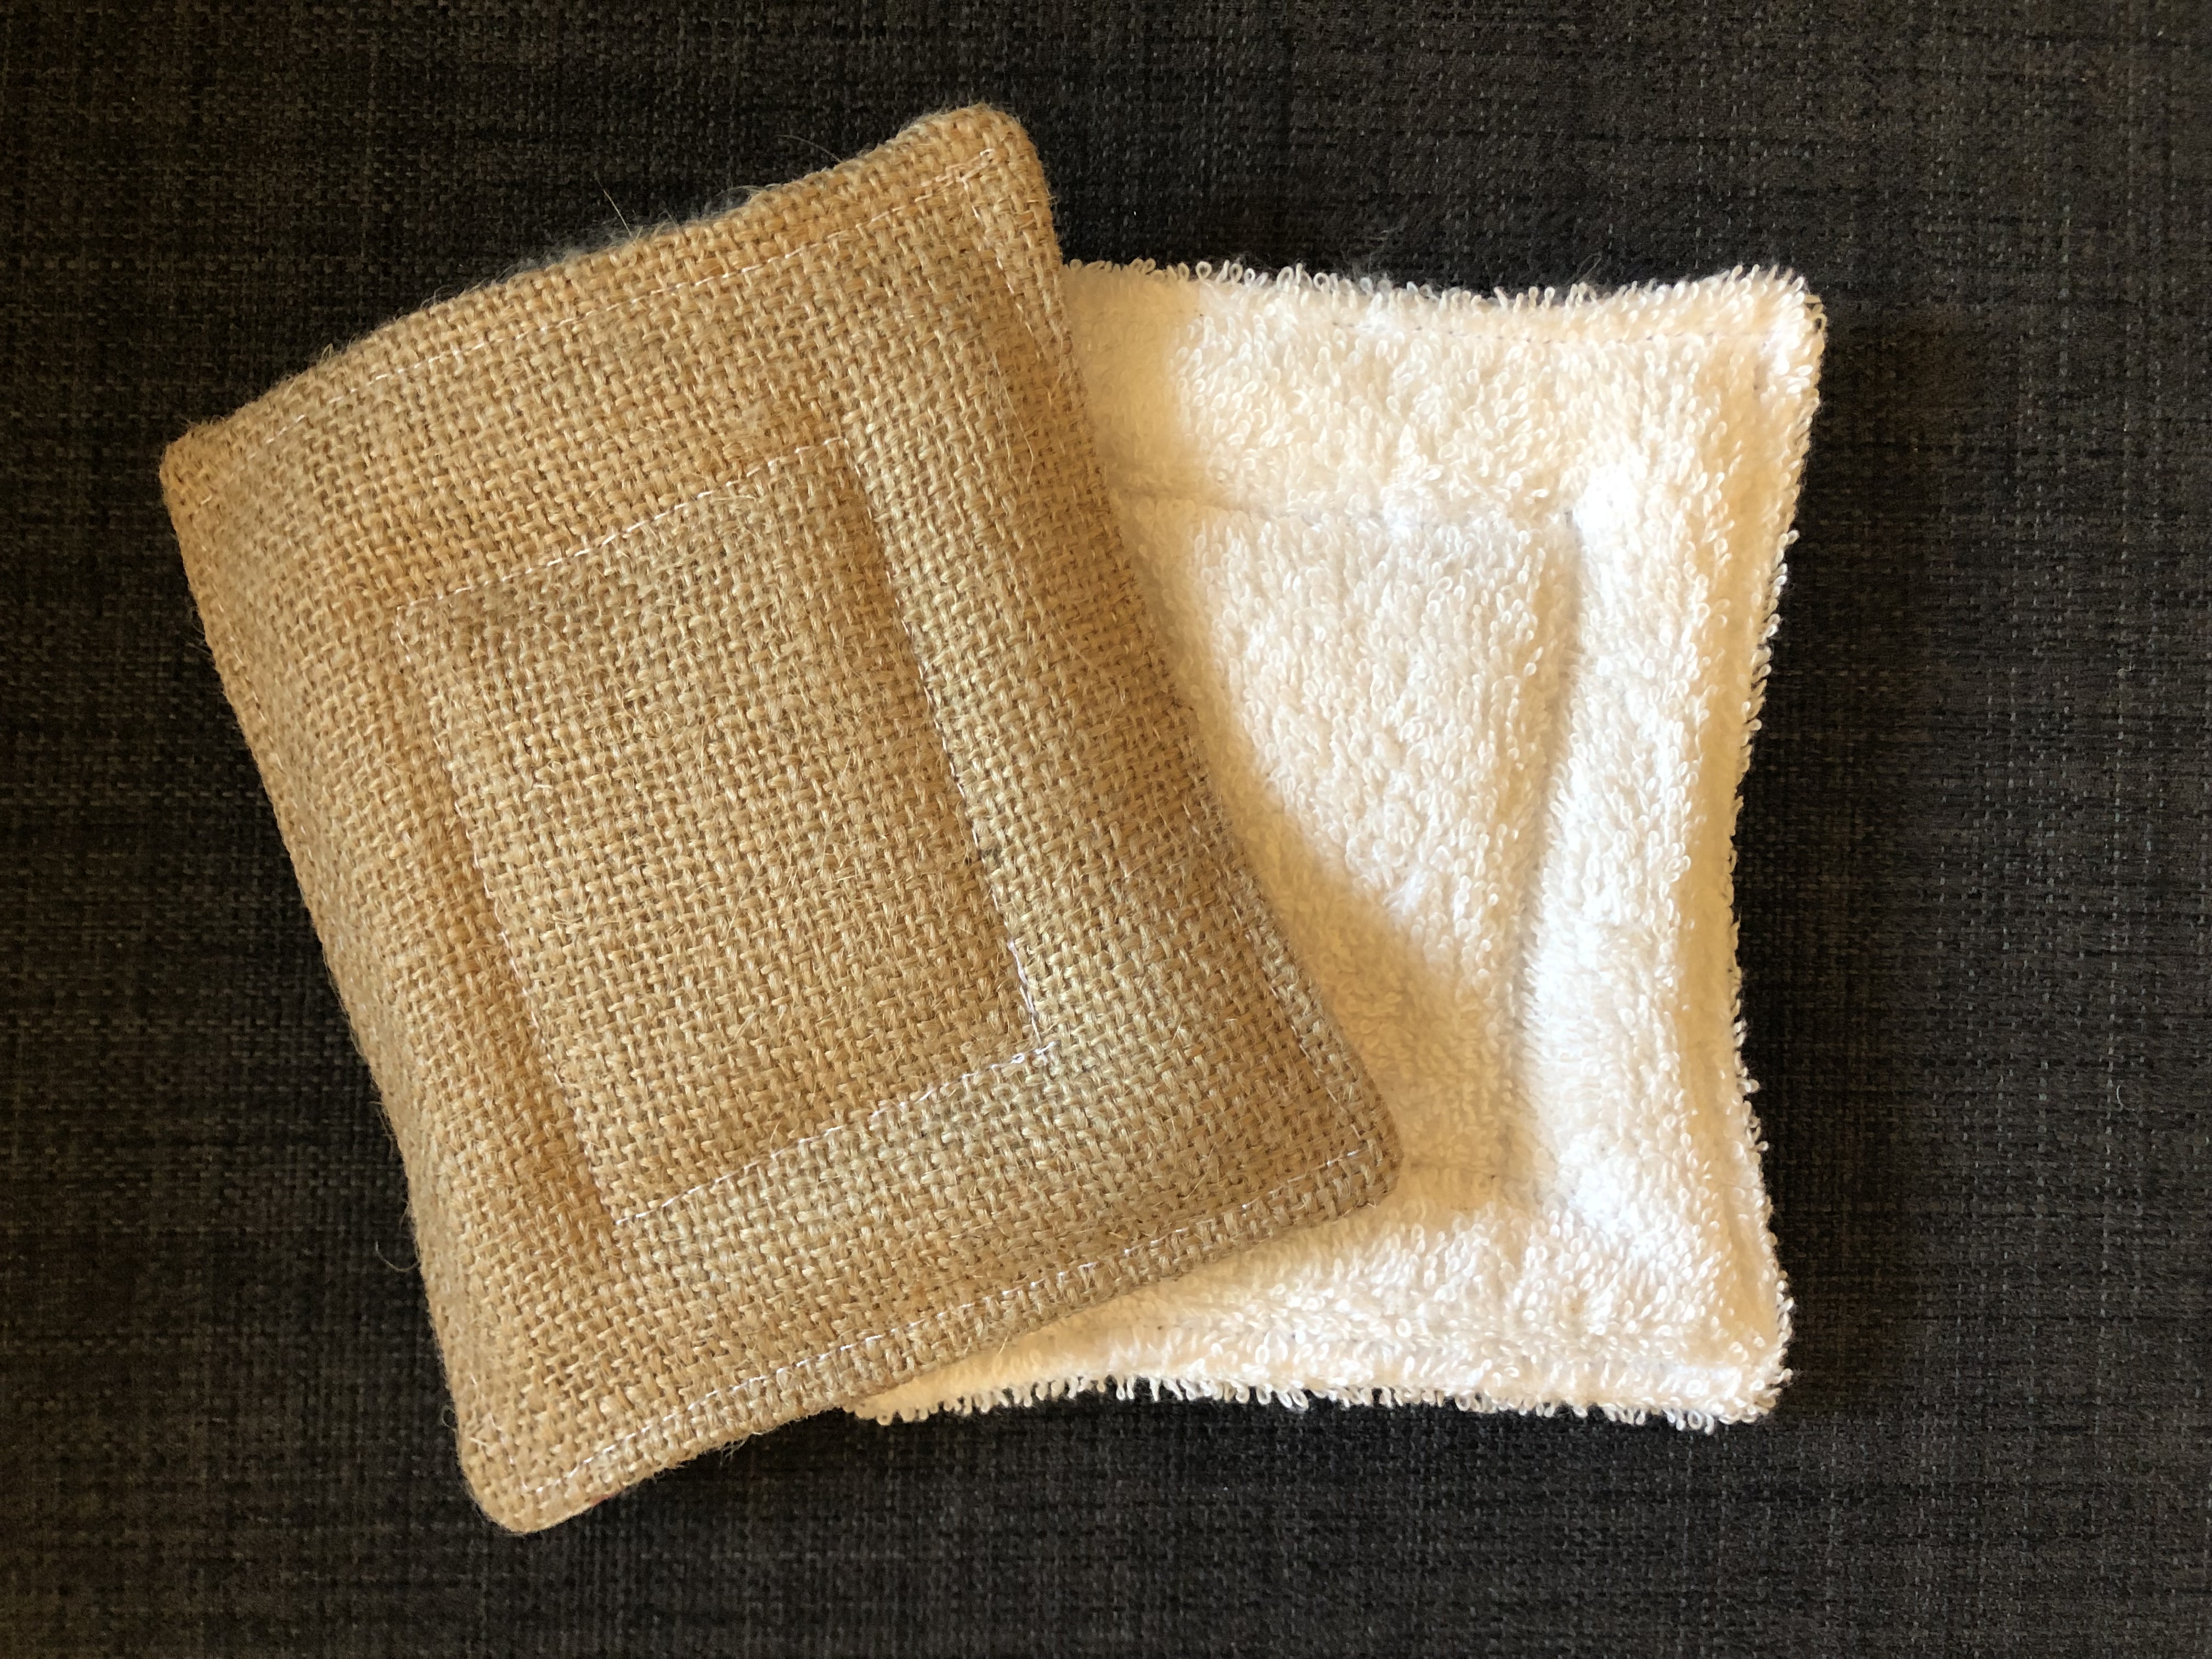 Unsponge hessian and terry cloth eco-friendly sponges